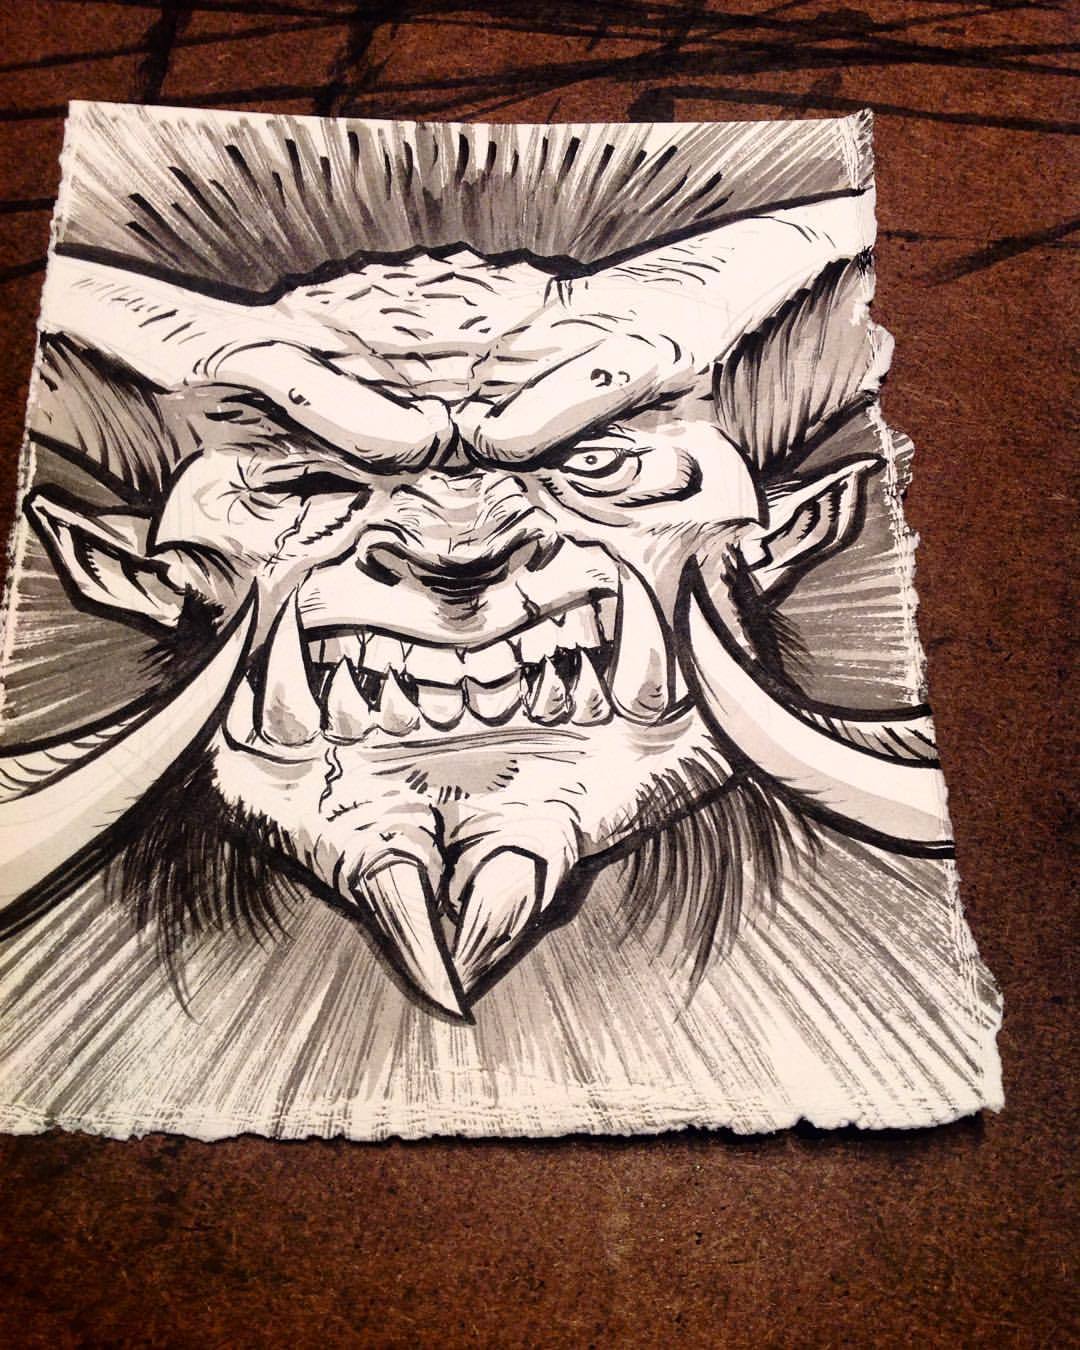 Ok last one of the day promise. I&rsquo;m finally caught up. #drawlloween day 17 #demon #devil #monster #scary #sketch #sketches #sketchbook #doodle #ink #inkwash #inktober #halloween